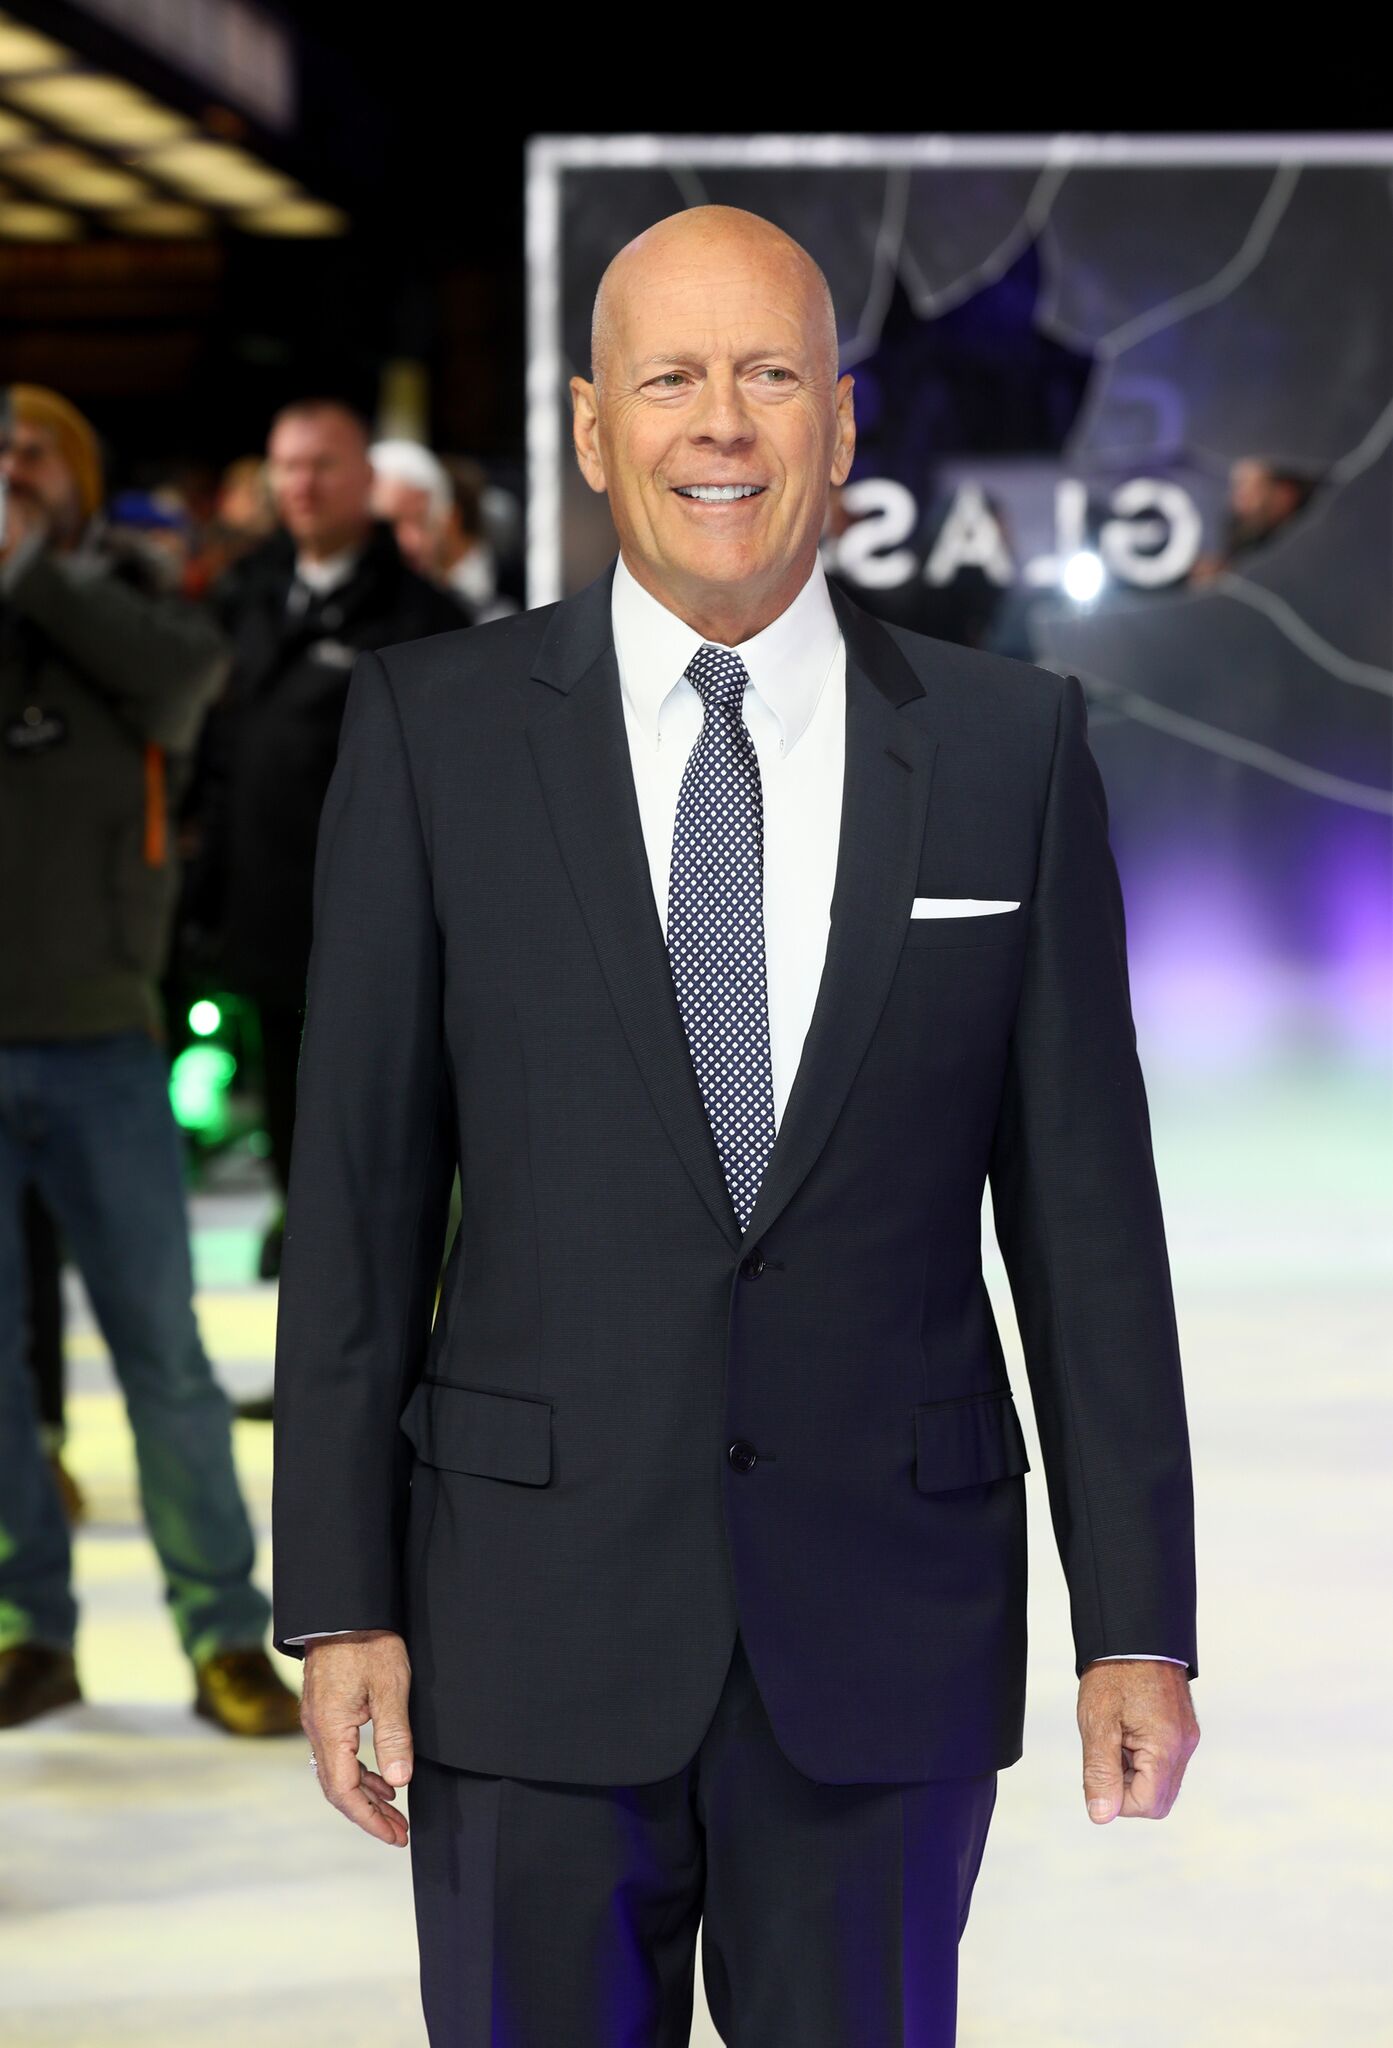 Bruce Willis attends the UK Premiere of M. Night Shyamalan's all-new comic-book thriller "Glass" at Curzon Cinema Mayfair | Photo: Getty Images